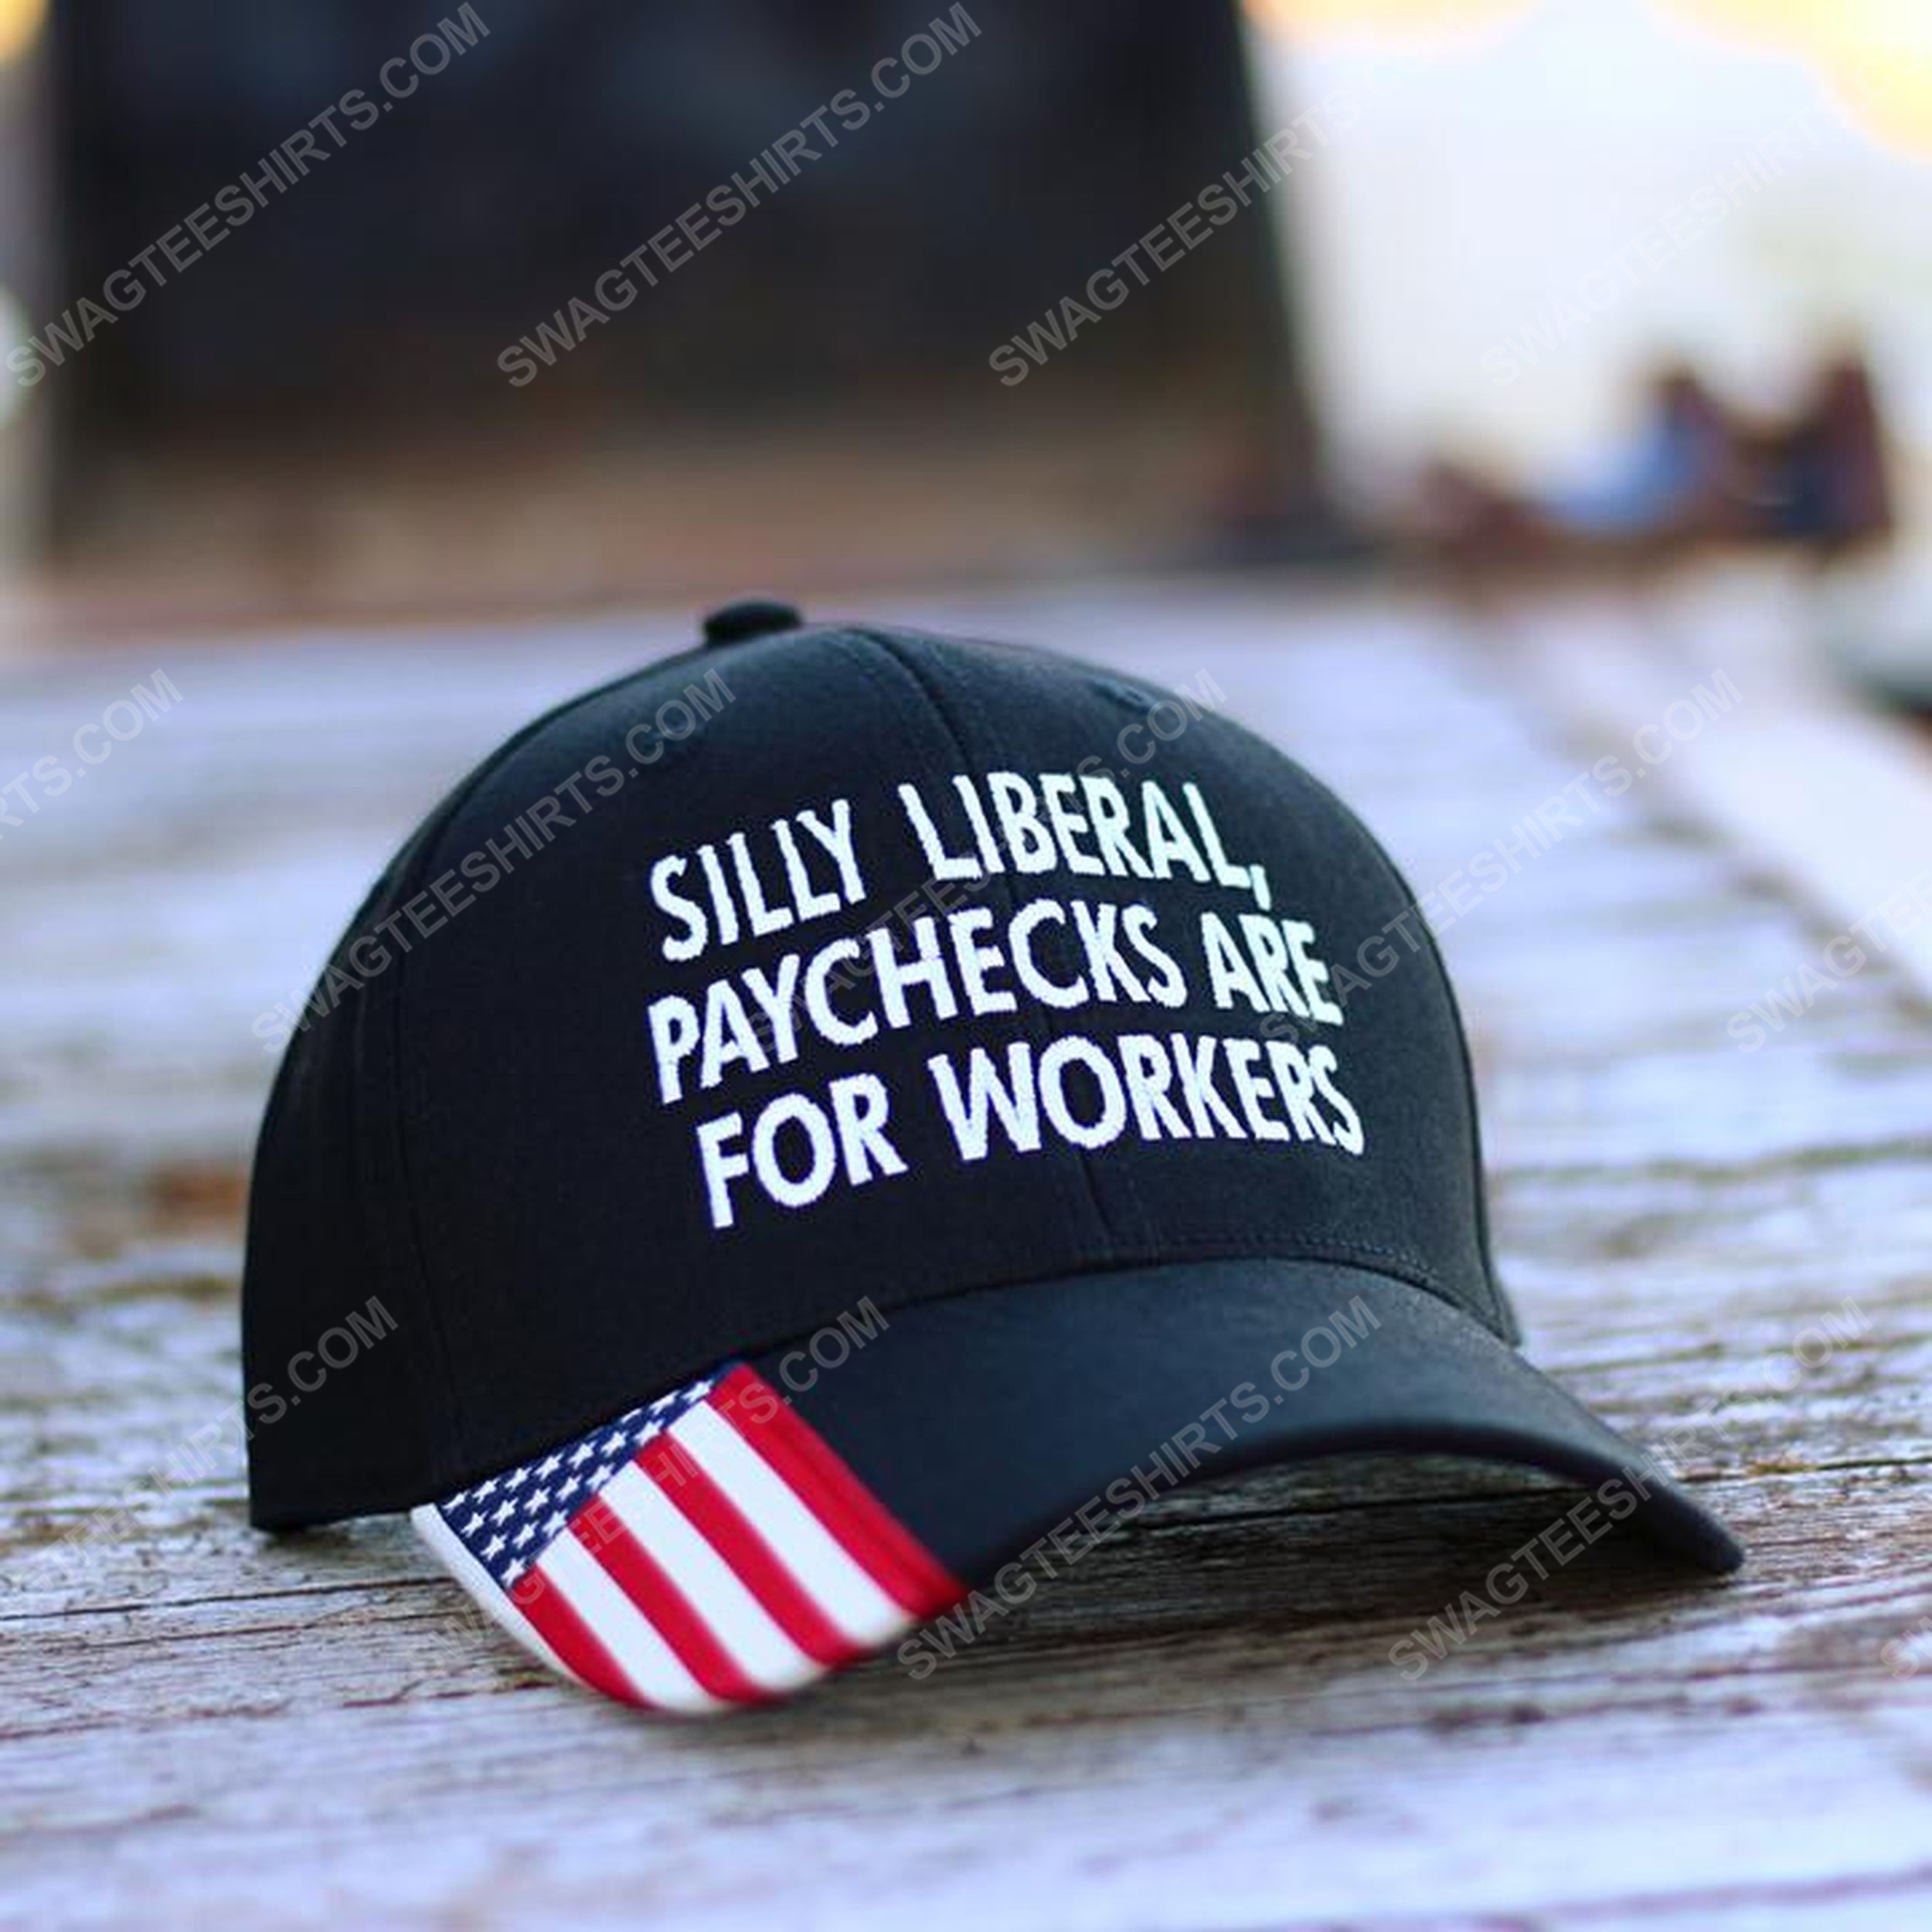 Silly liberal paychecks are for workers full print classic hat 1 - Copy (2)